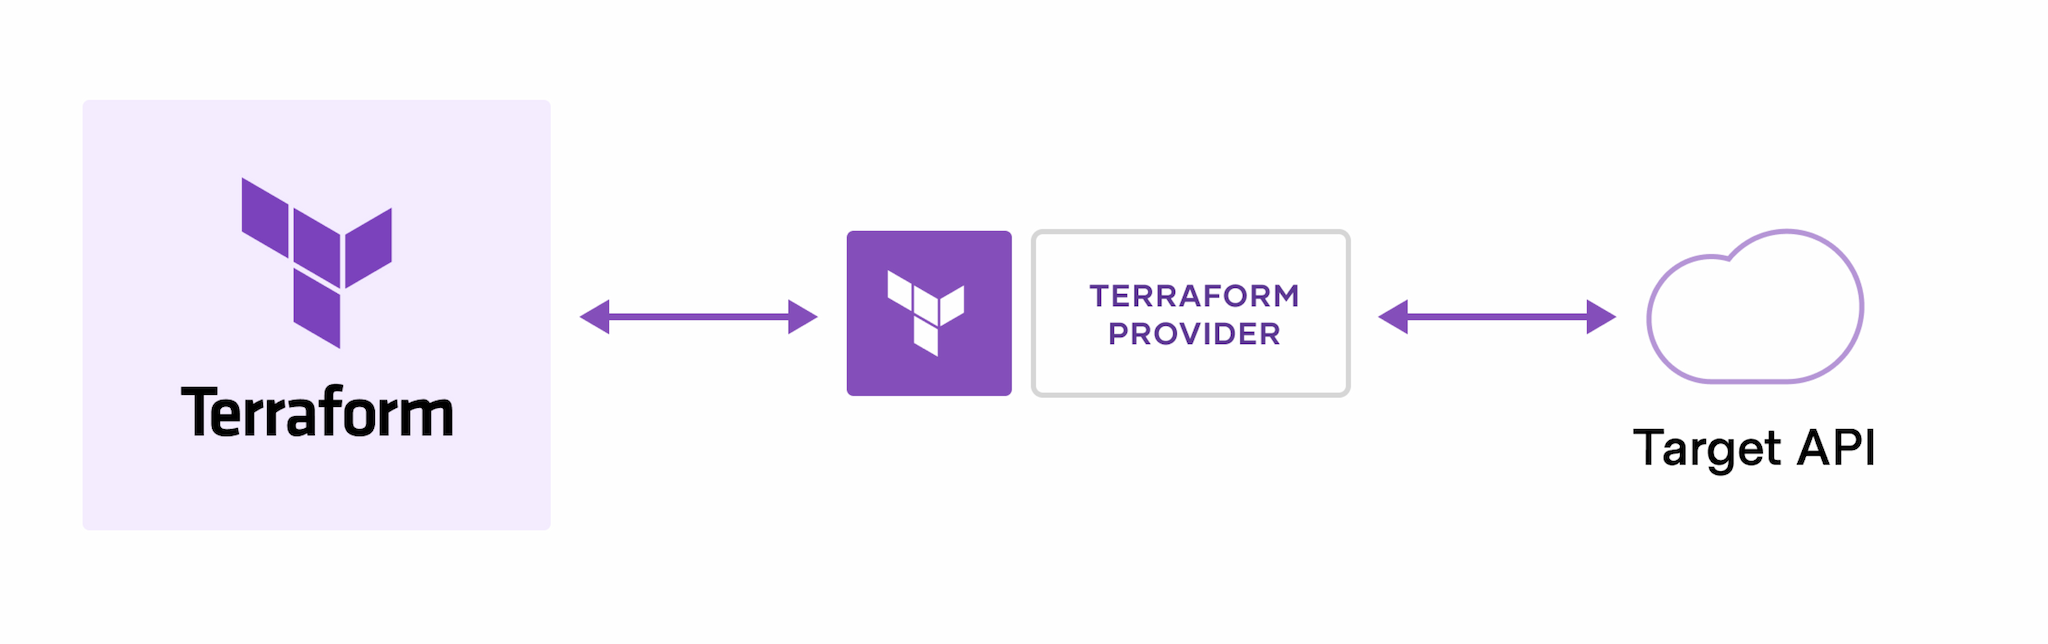 Terraform creates and manages cloud platforms and services through their APIs